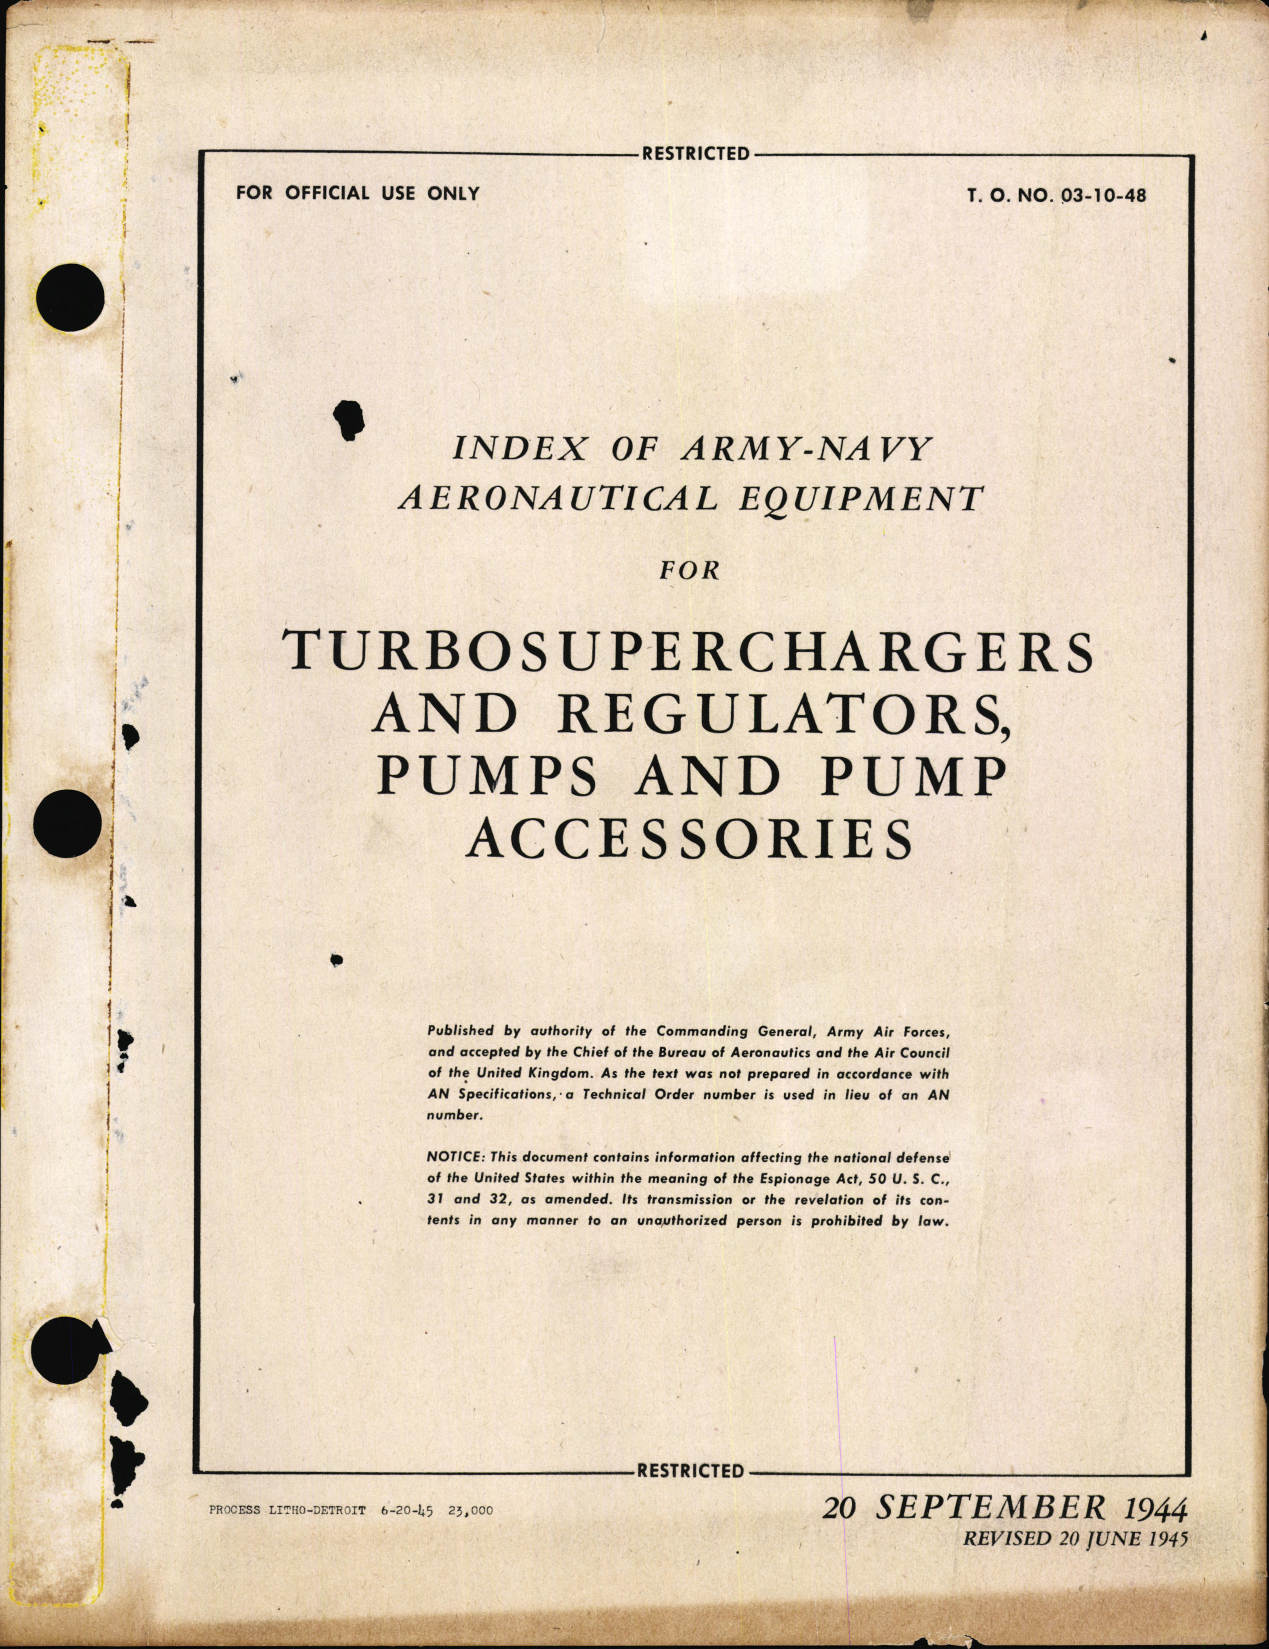 Sample page 1 from AirCorps Library document: Index of Army-Navy Aeronautical Equipment - Turbosuperchargers and Regulators, Pumps, and Pump Accessories